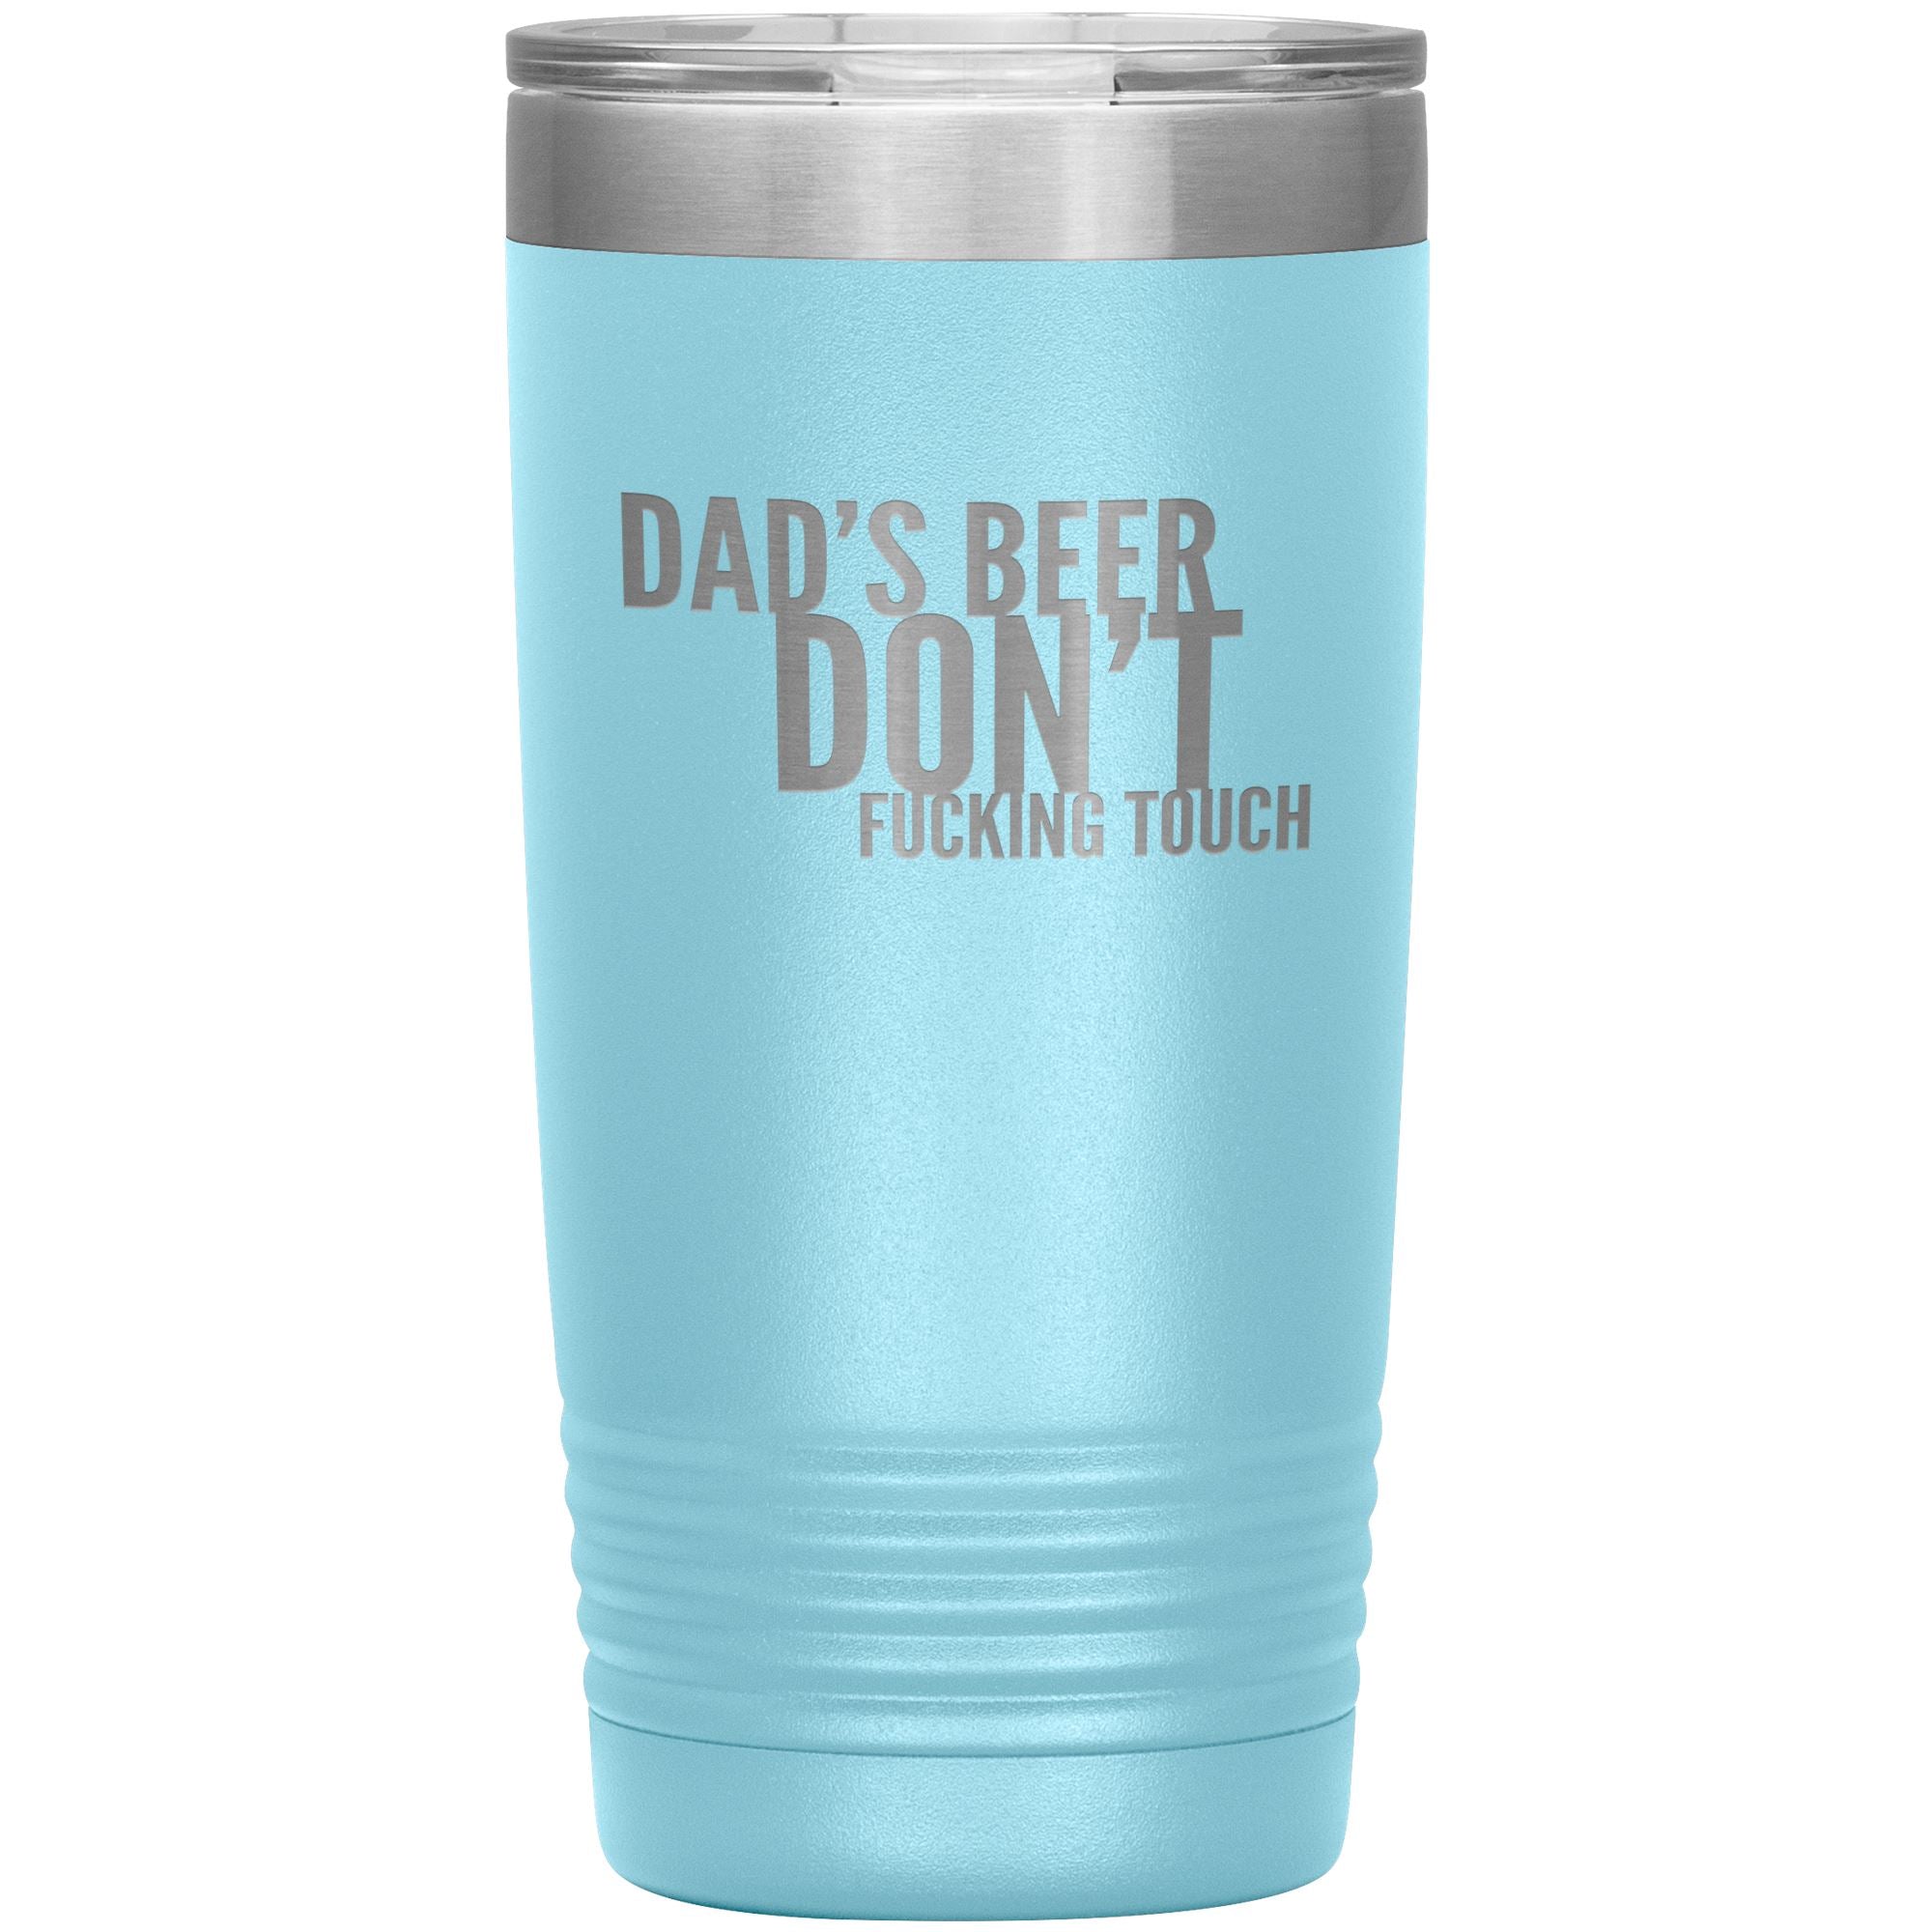 Dad's Beer Don't Fucking Touch 20oz Tumbler Tumblers Light Blue 